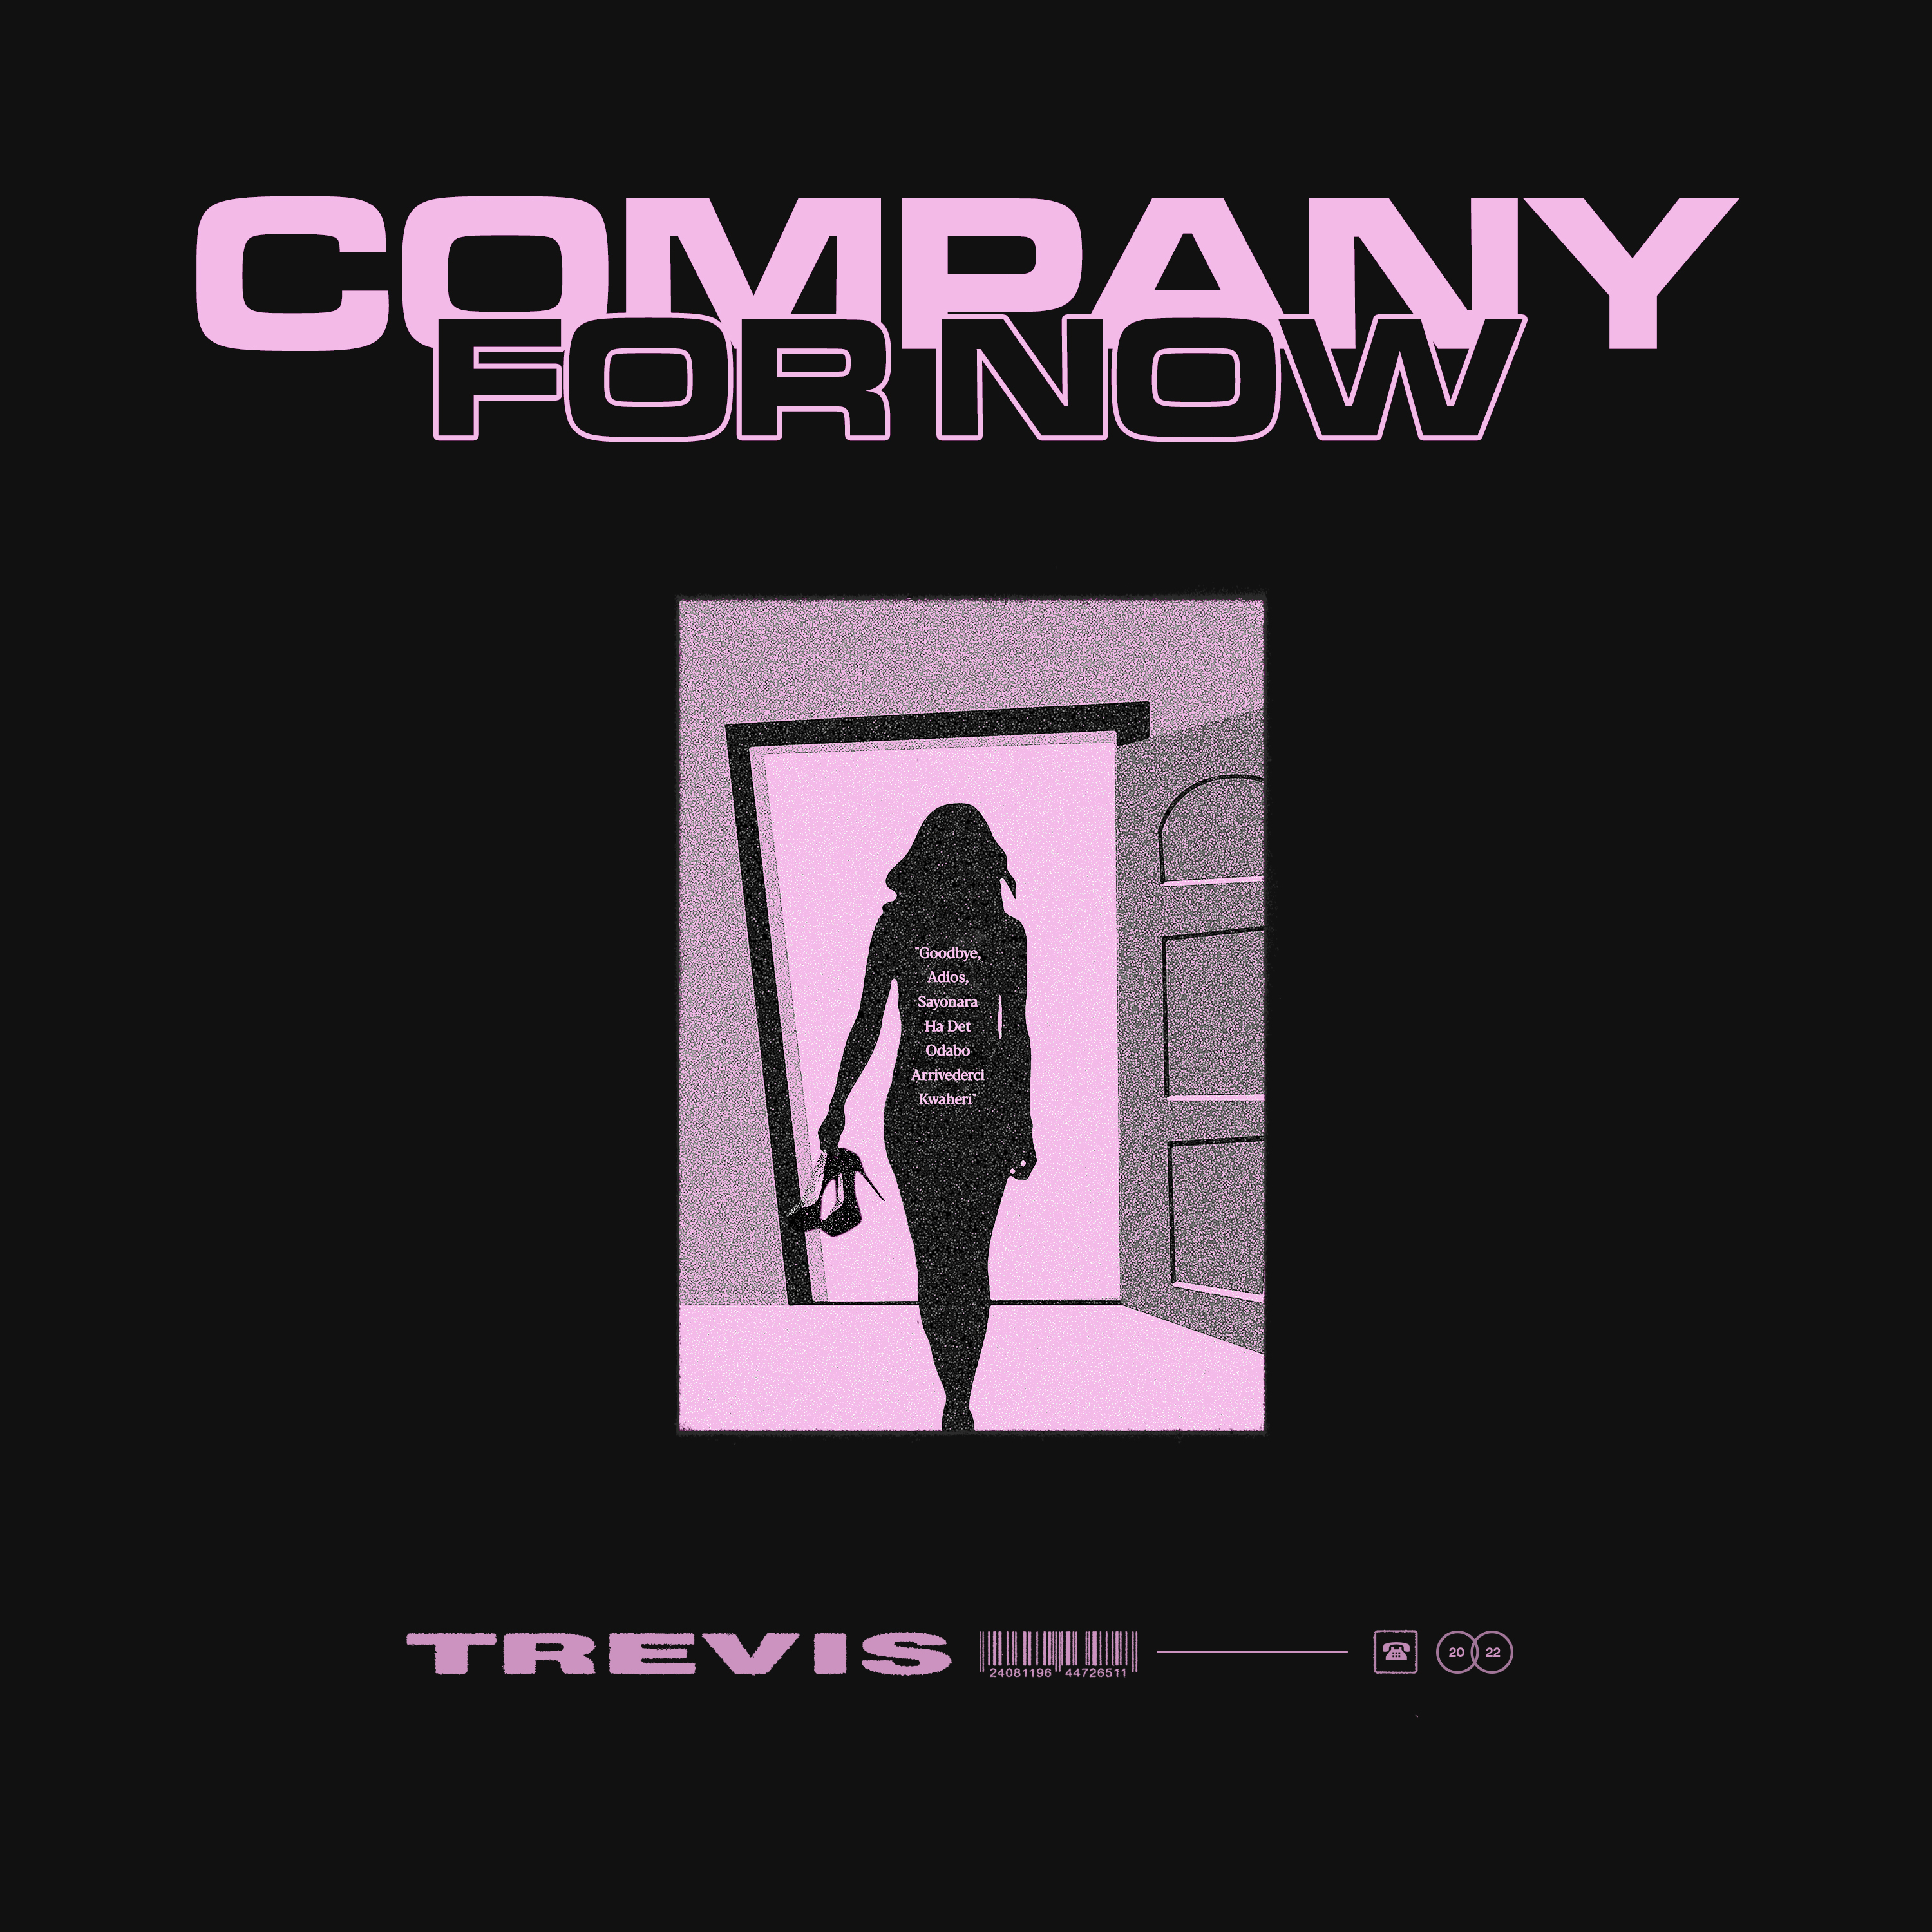 RISING CALI-BASED PRODIGY TREVIS SHARES R&B CHARMER ‘COMPANY FOR NOW’